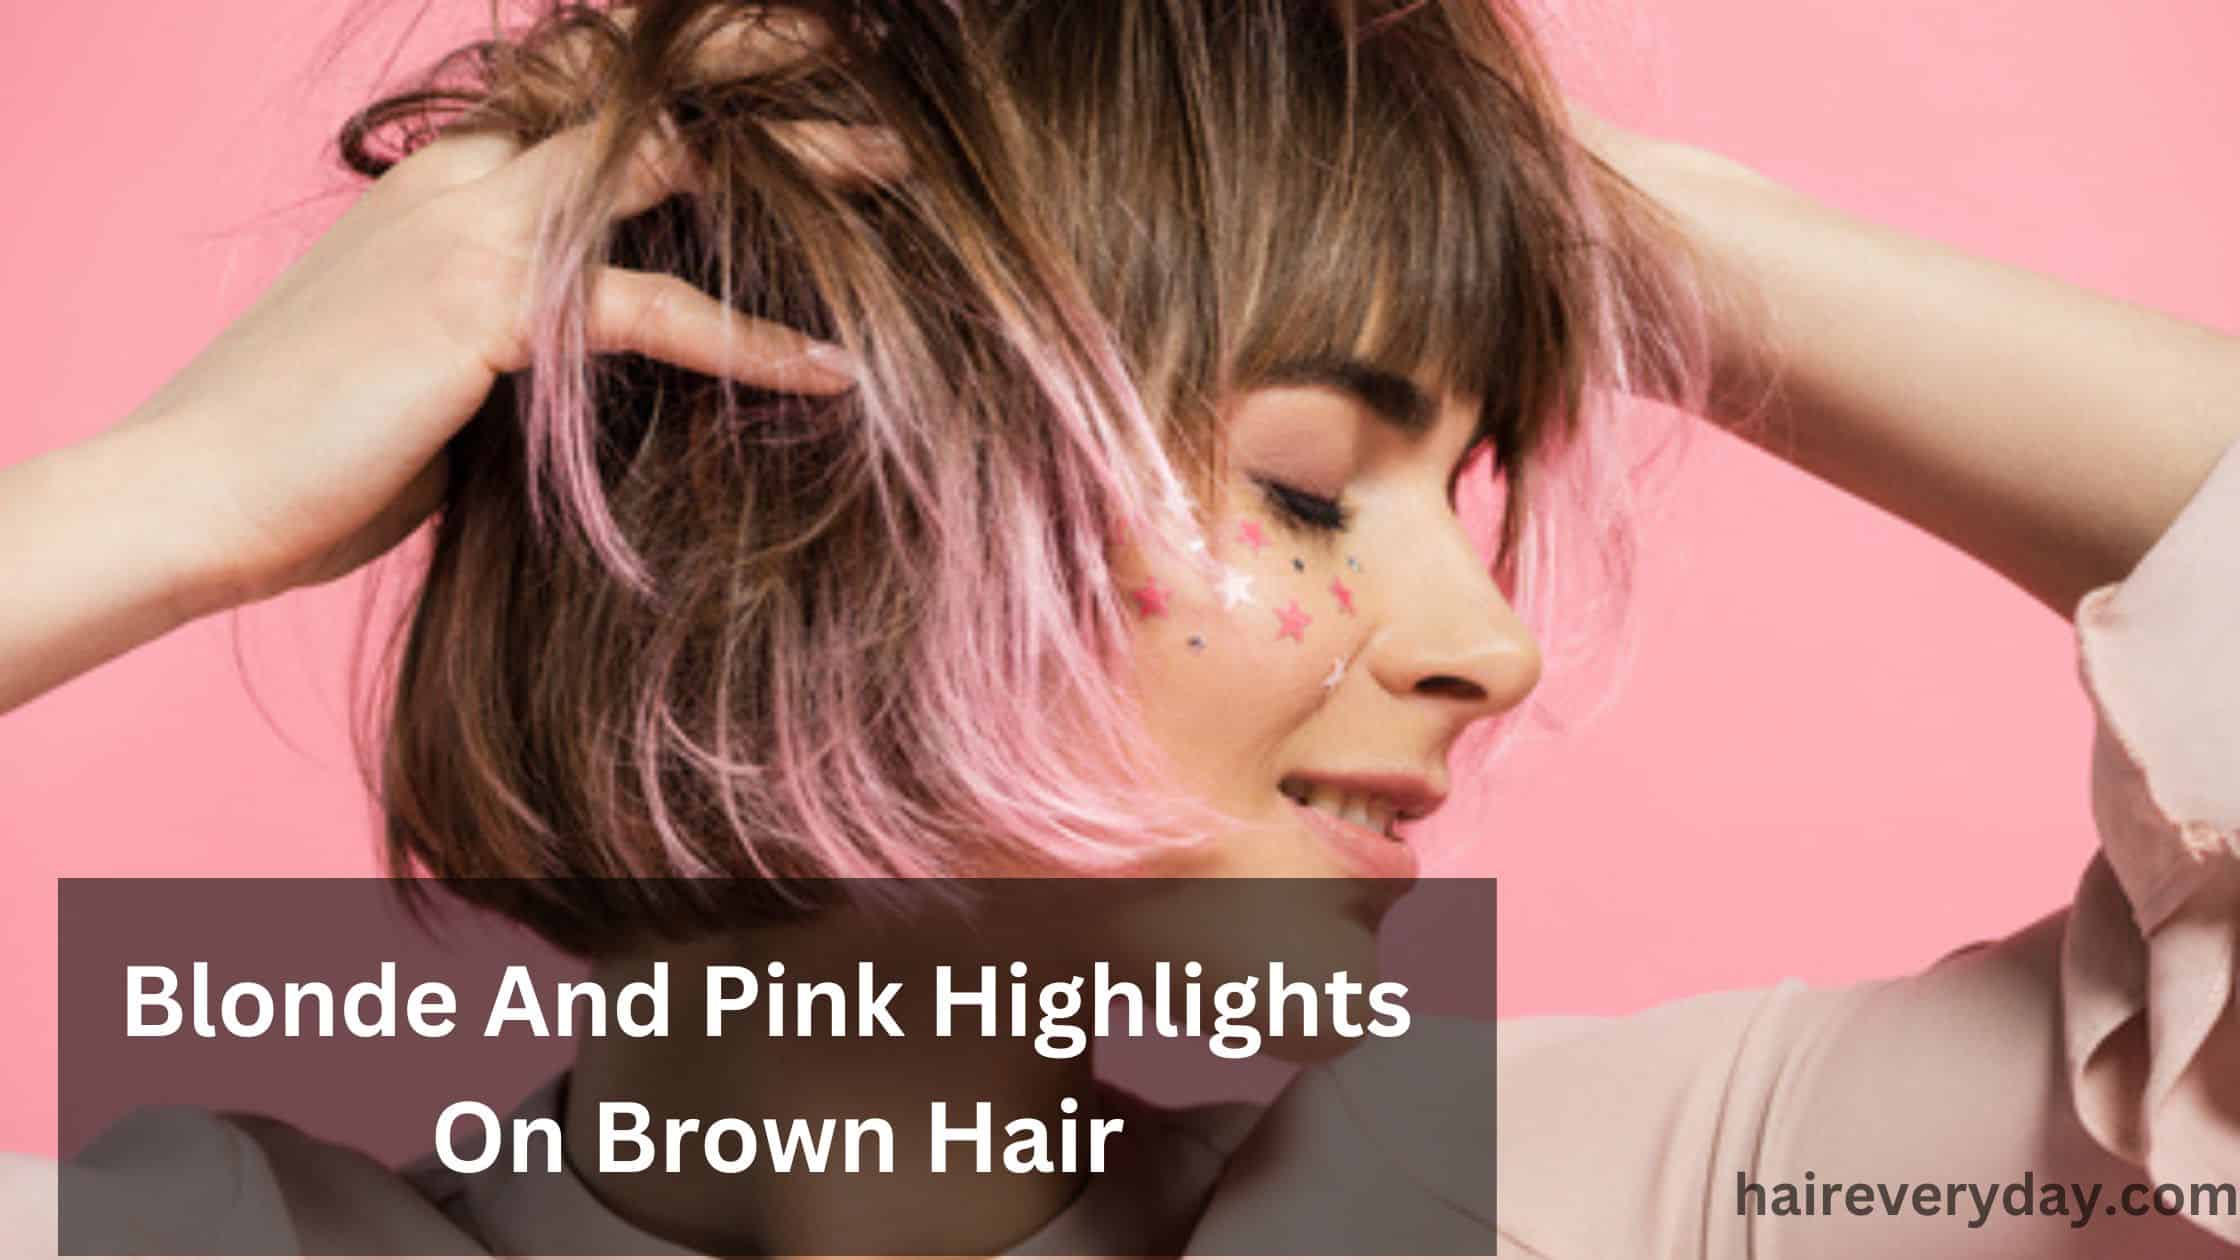 8 Different Blonde And Pink Highlights On Brown Hair 2023 - Hair Everyday  Review